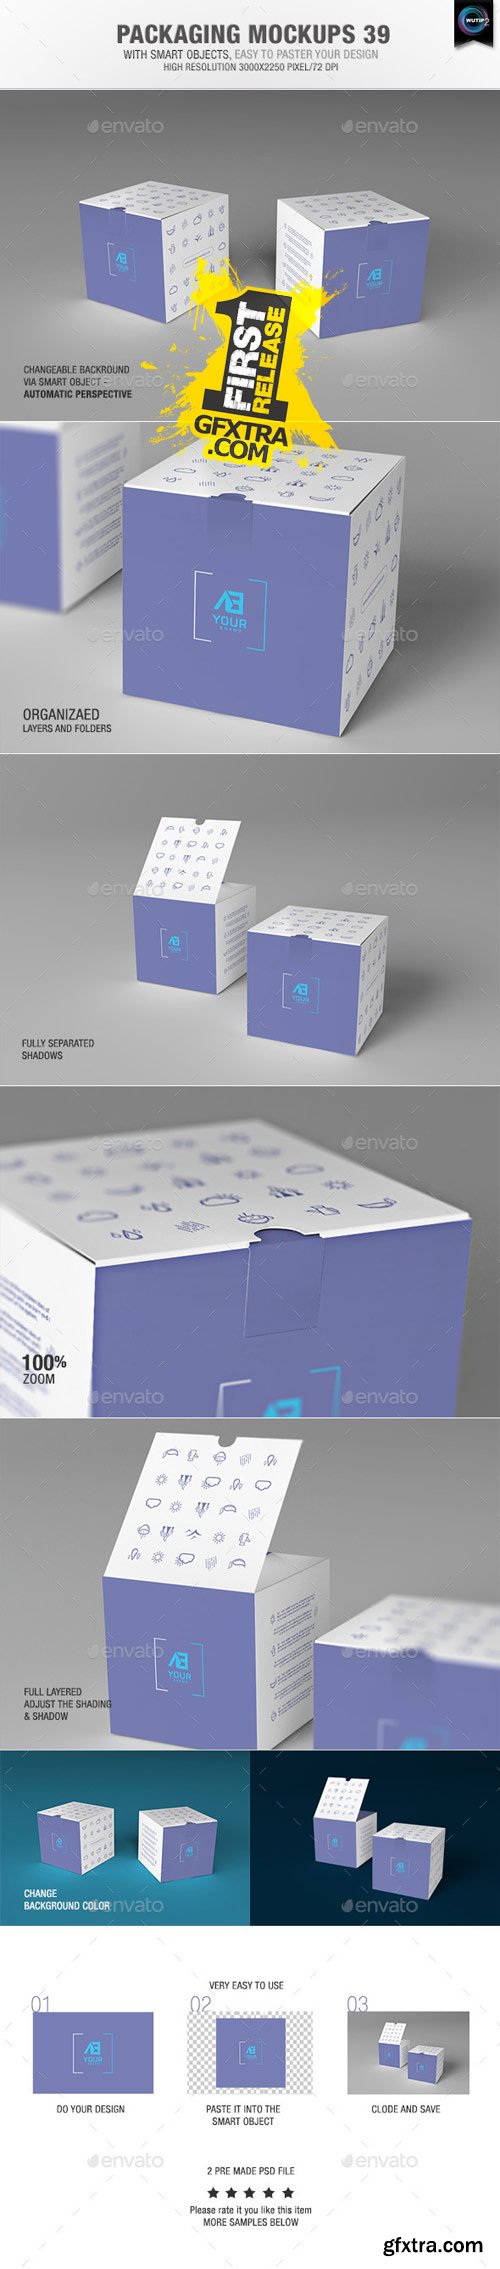 Graphicriver - Packaging Mock-ups 39